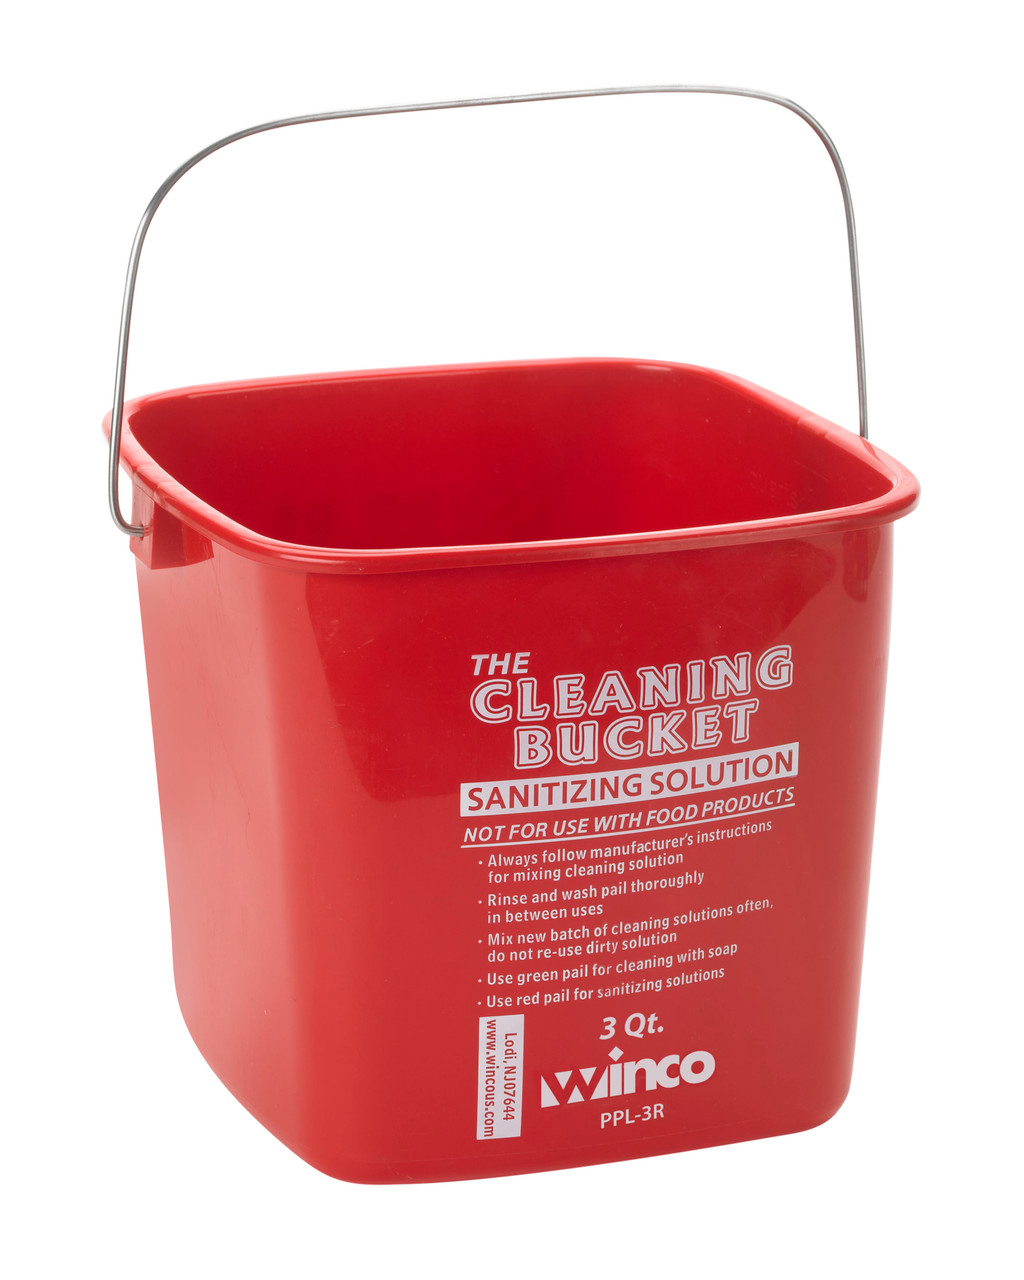 Winco 3Qt Cleaning Bucket, Red Sanitizing Solution